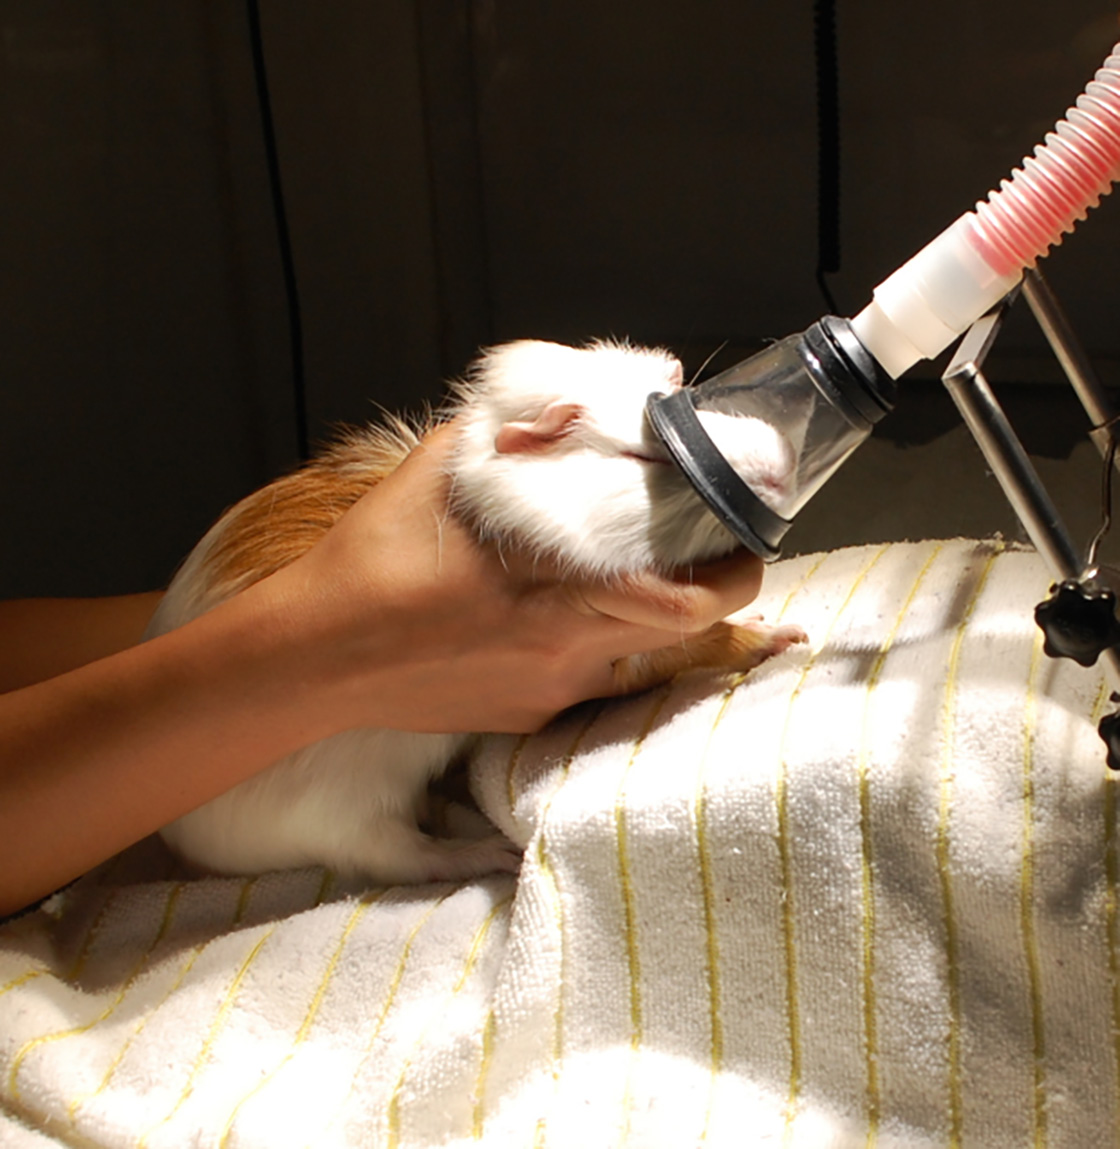 A guinea pig under anesthesia with an anesthetic mask on its face, held by a veterinary professional during a medical procedure.